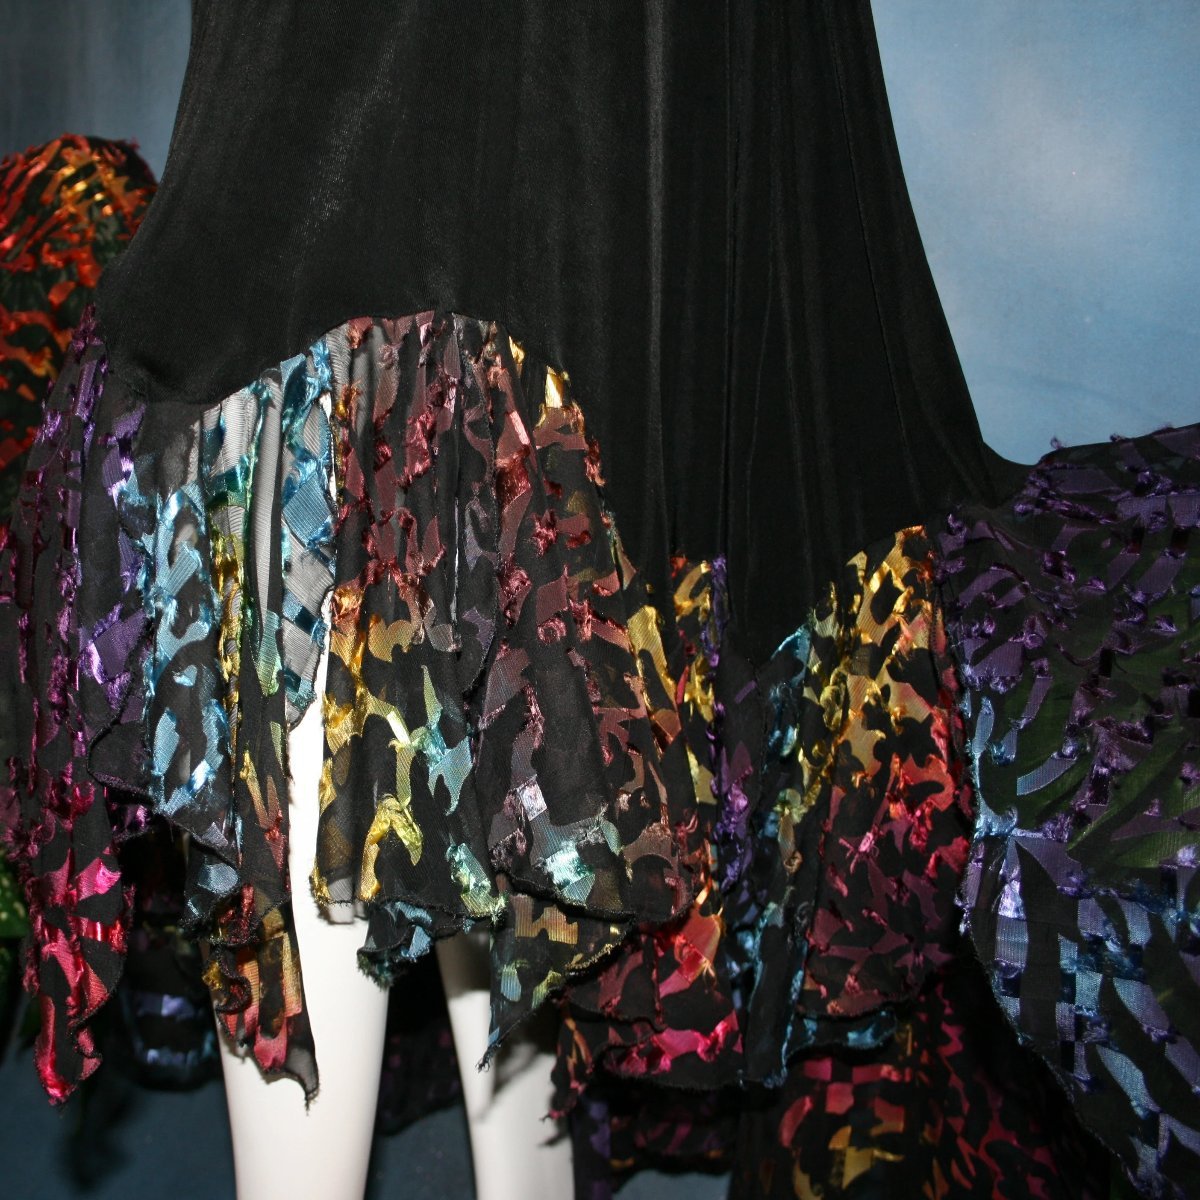 lower view of Black social ballroom dress created in luxurious black solid slinky fabric with yards of gorgeous rainbow colorful & textured sheer fabric. A great social dress for any special occasion, as well as a great beginner ballroom show dress!